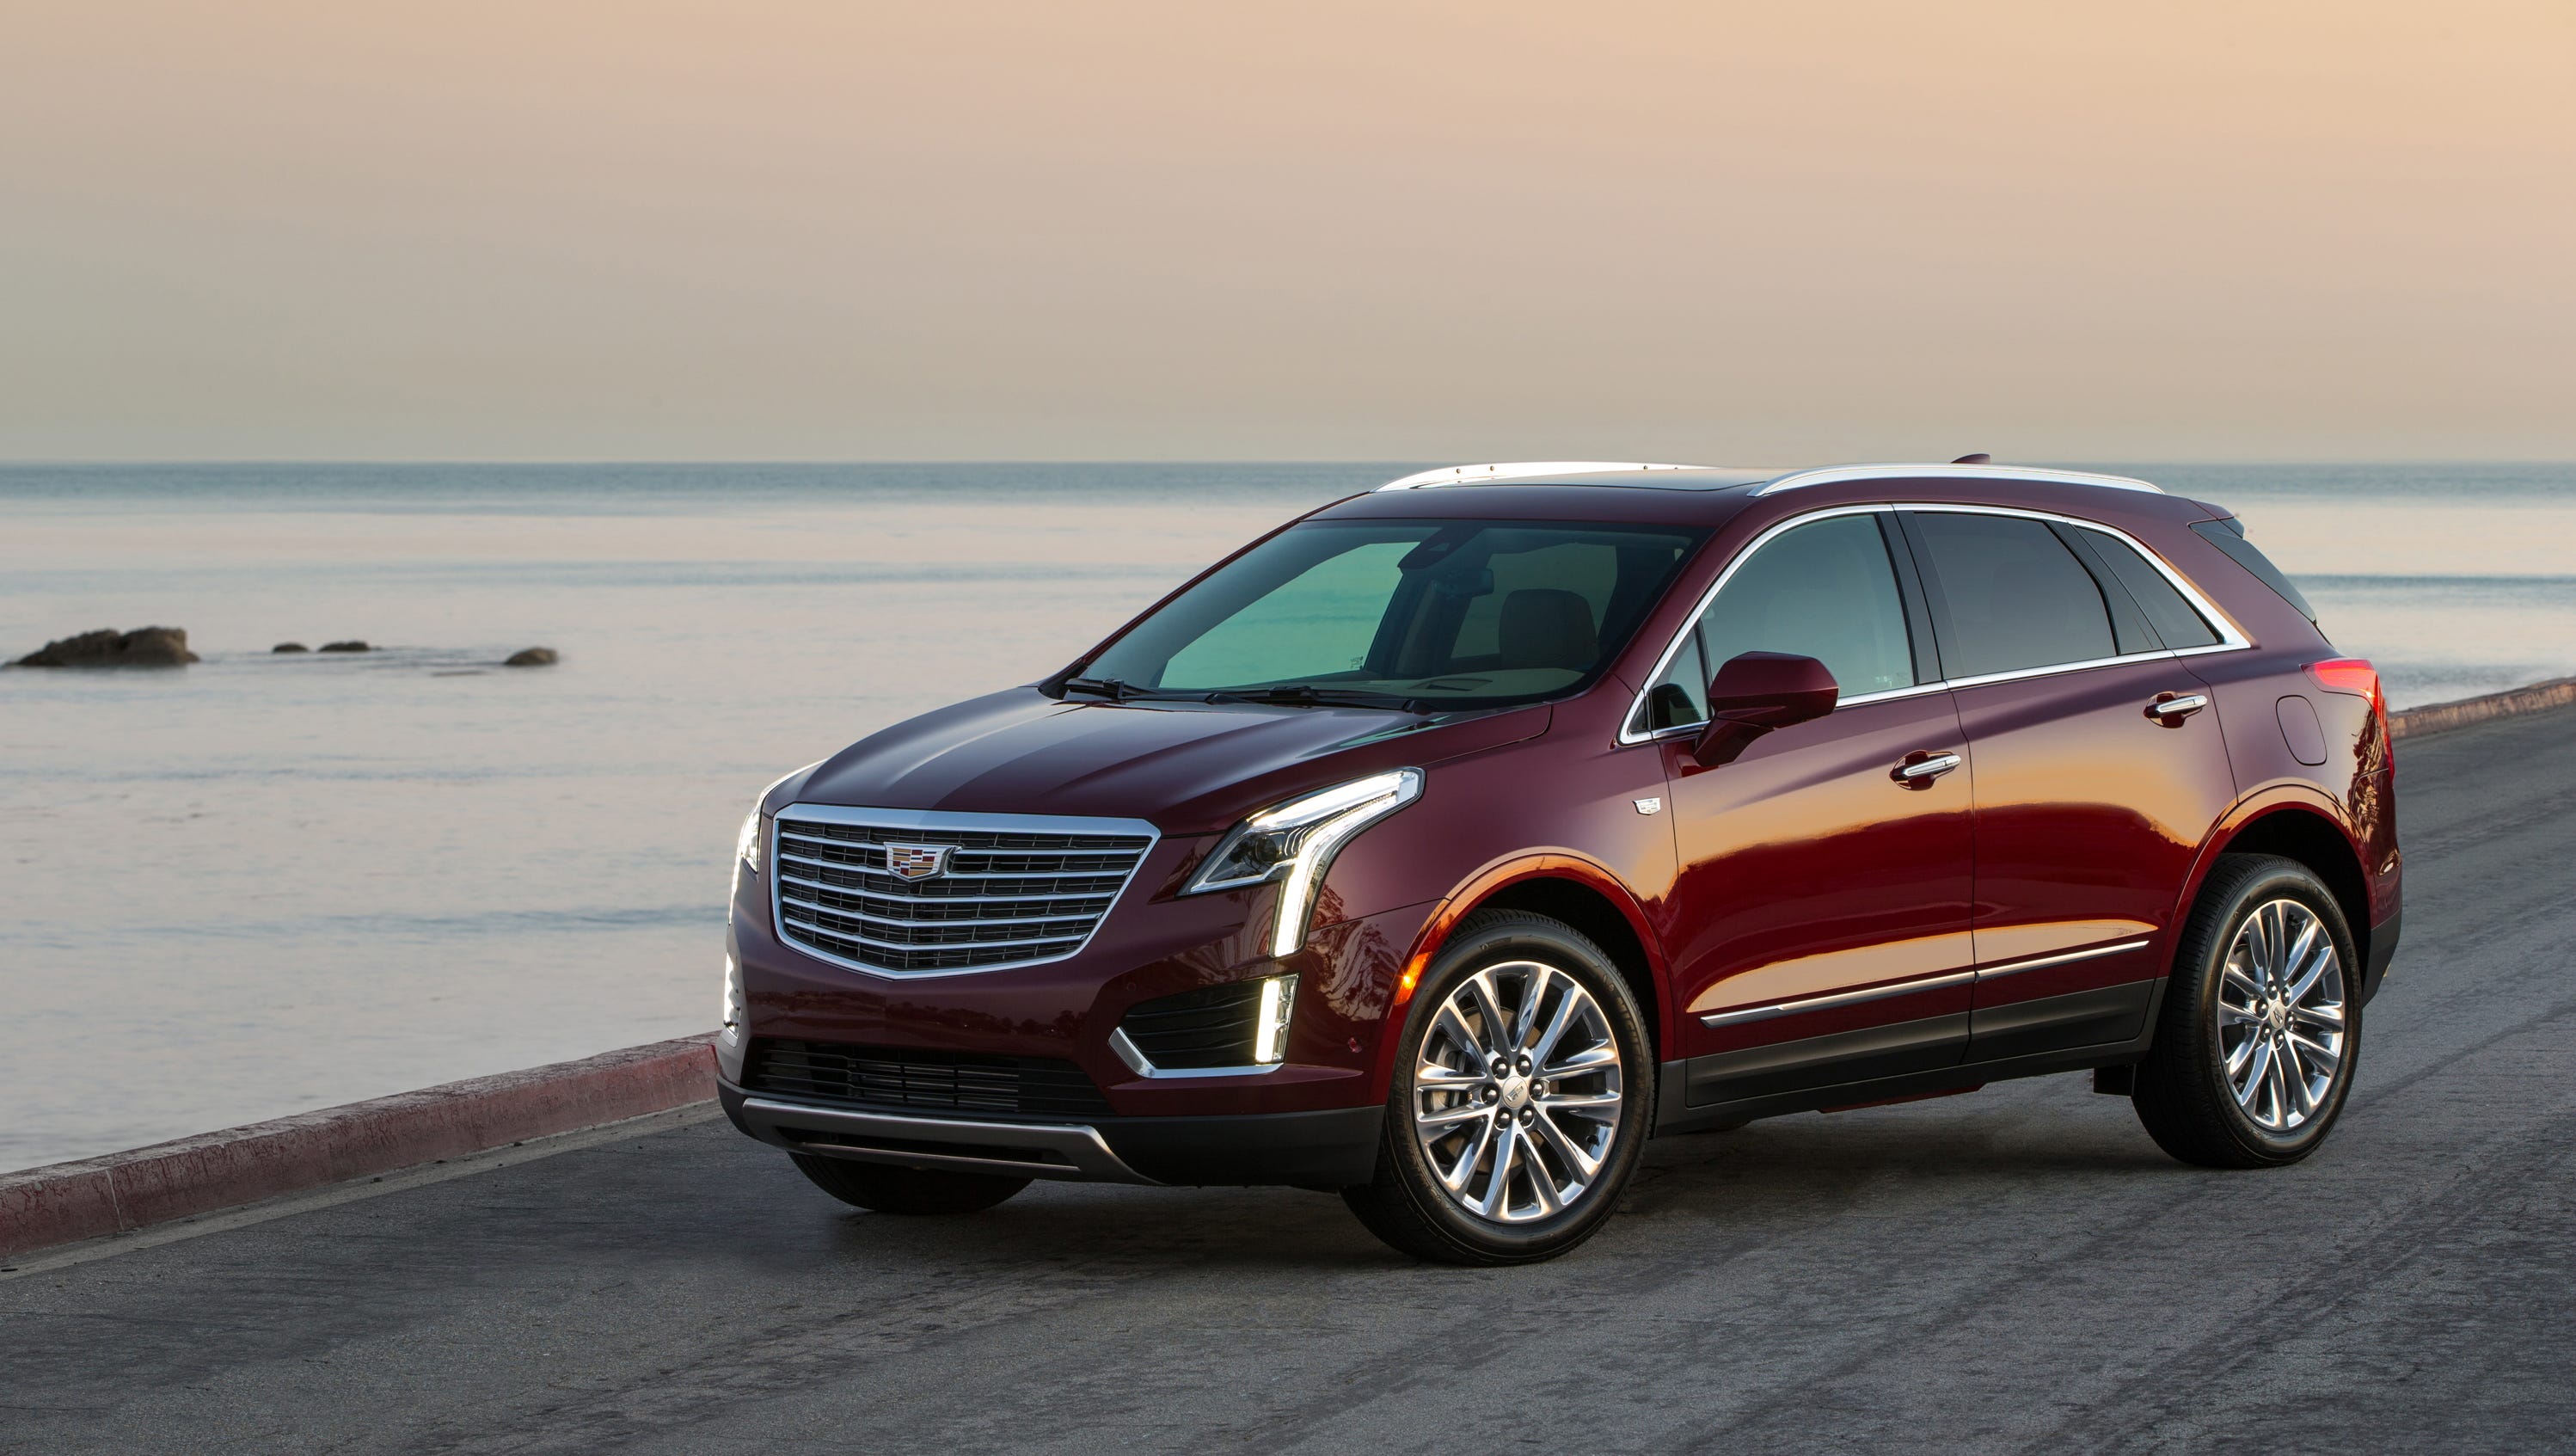 Review: 2017 Cadillac XT5 challenges best luxury SUVs